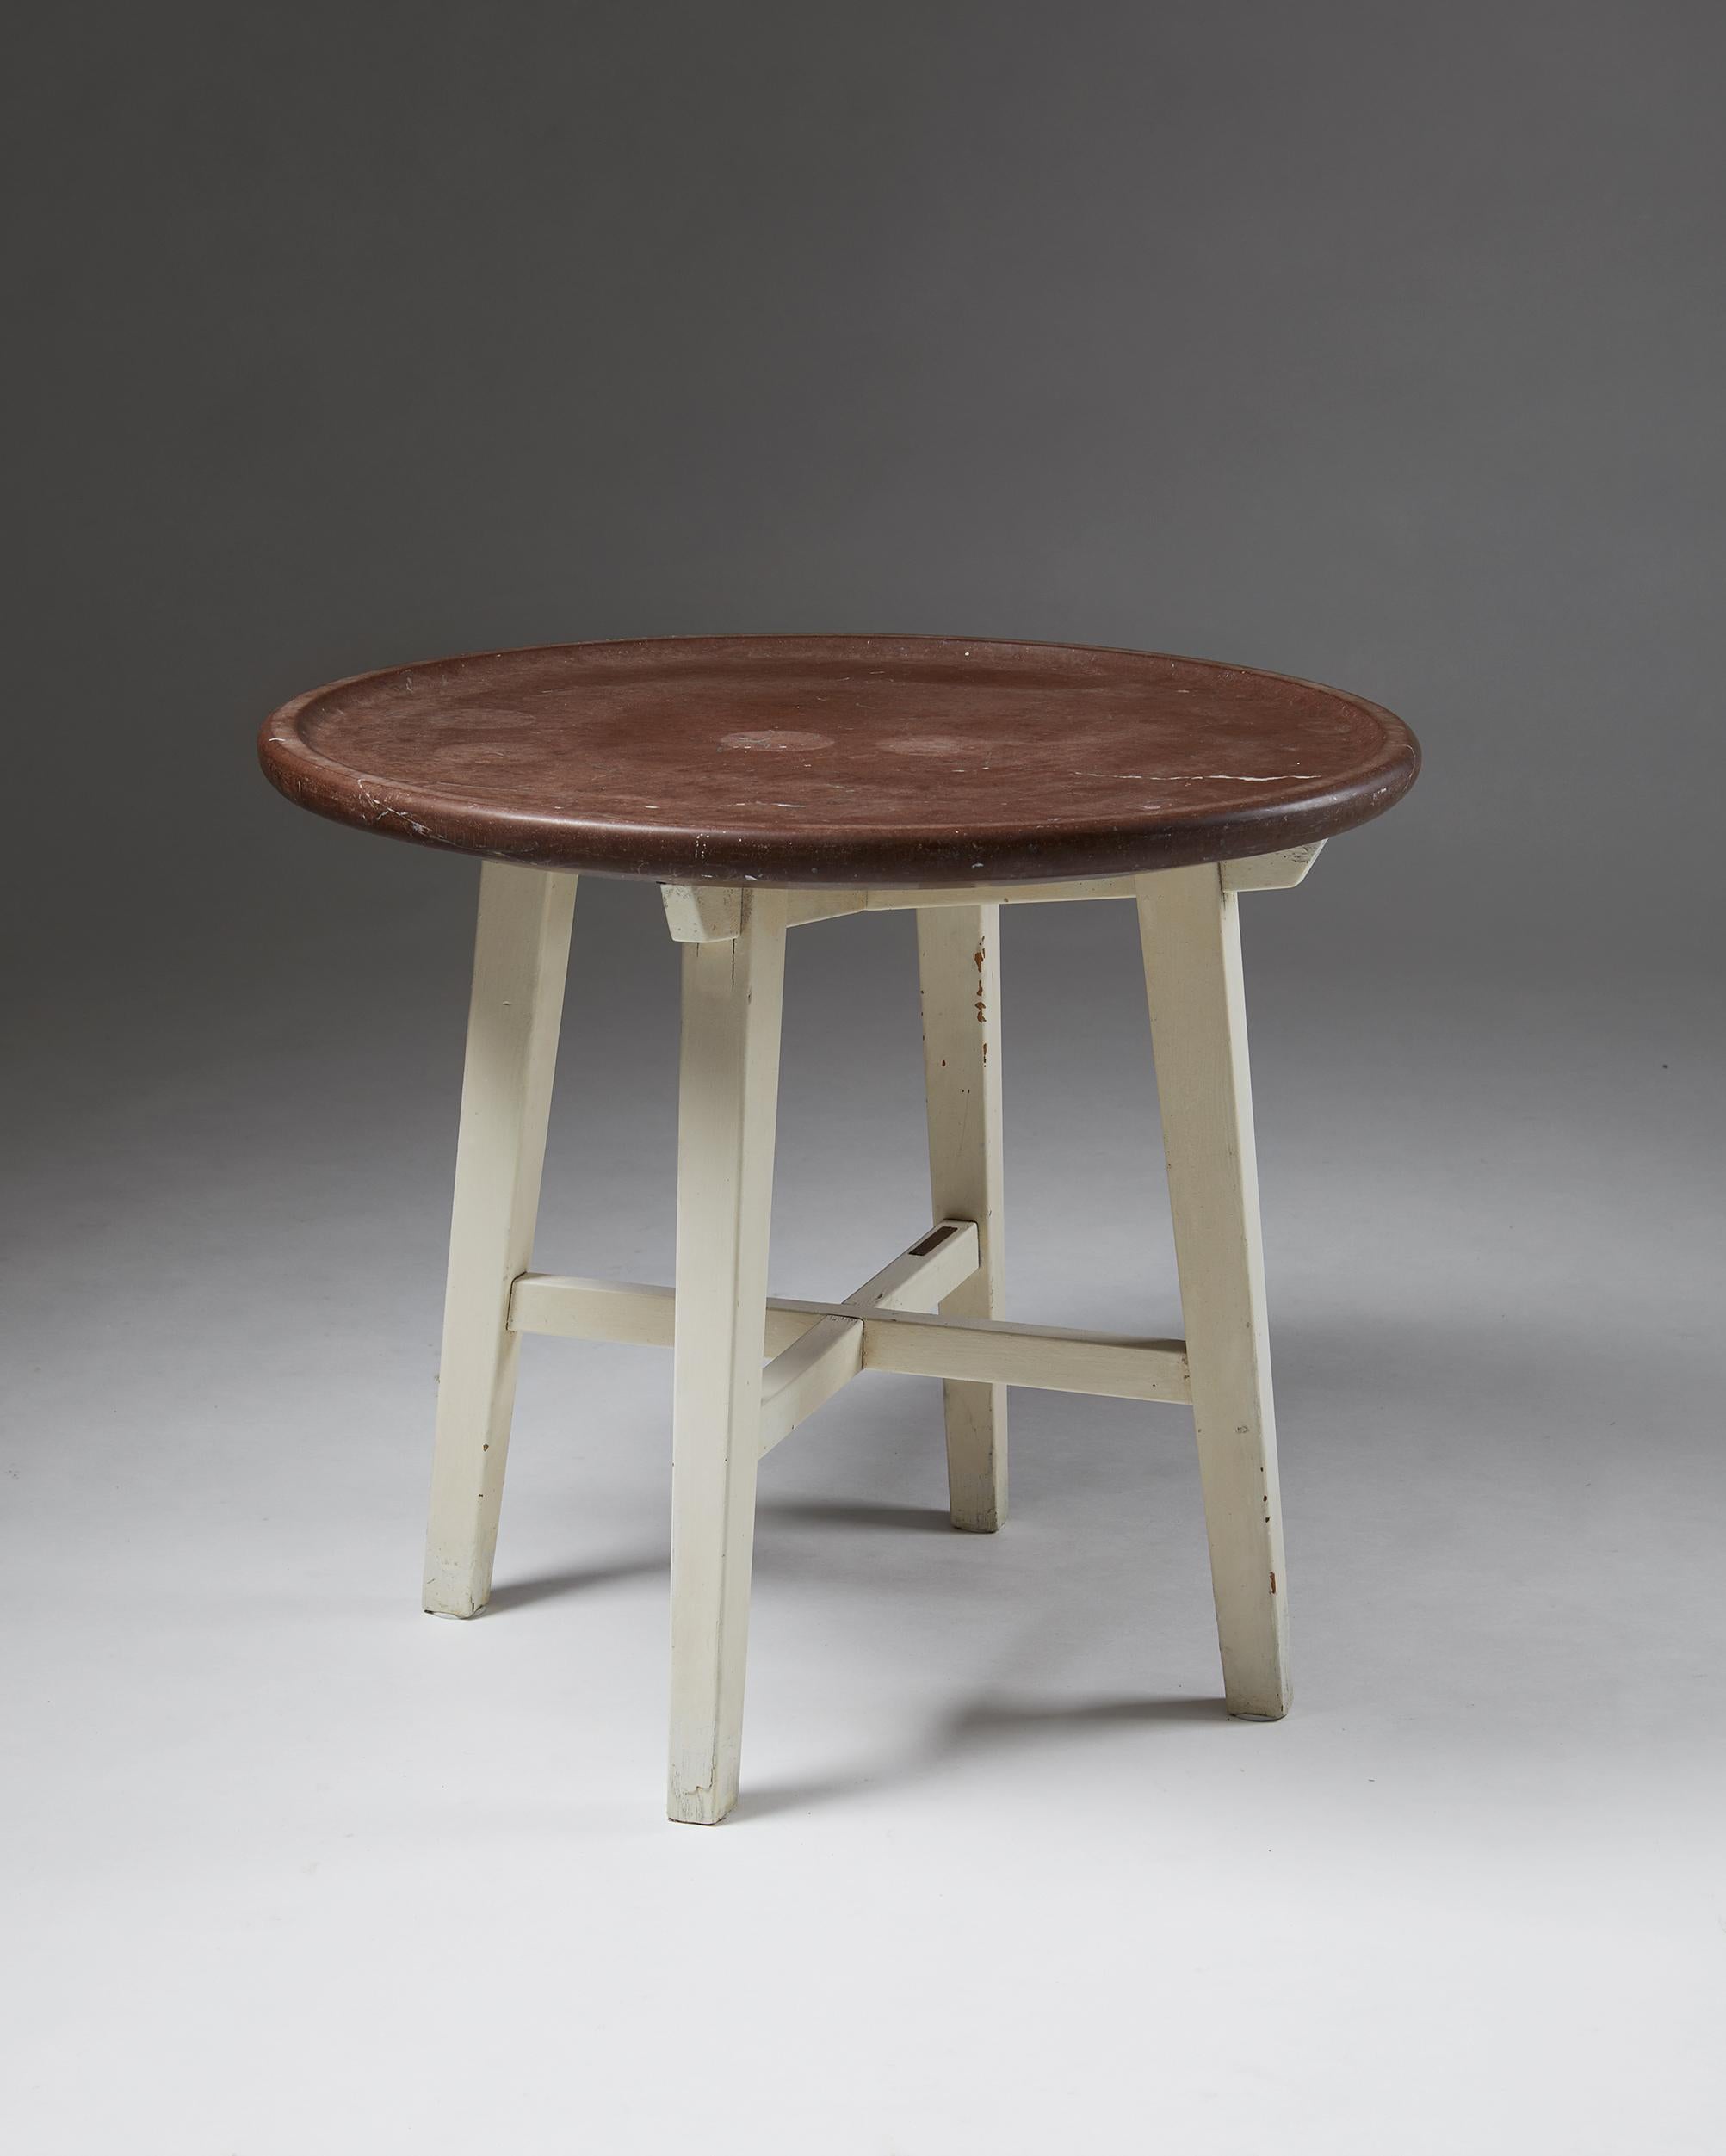 Occasional table, anonymous, Nordiska Kompaniet,
Sweden, 1950s.
Swedish limestone top and lacquered wooden base.

Stamped NK.

Measures: H 61 cm/ 2'
D 70 cm/ 2' 4